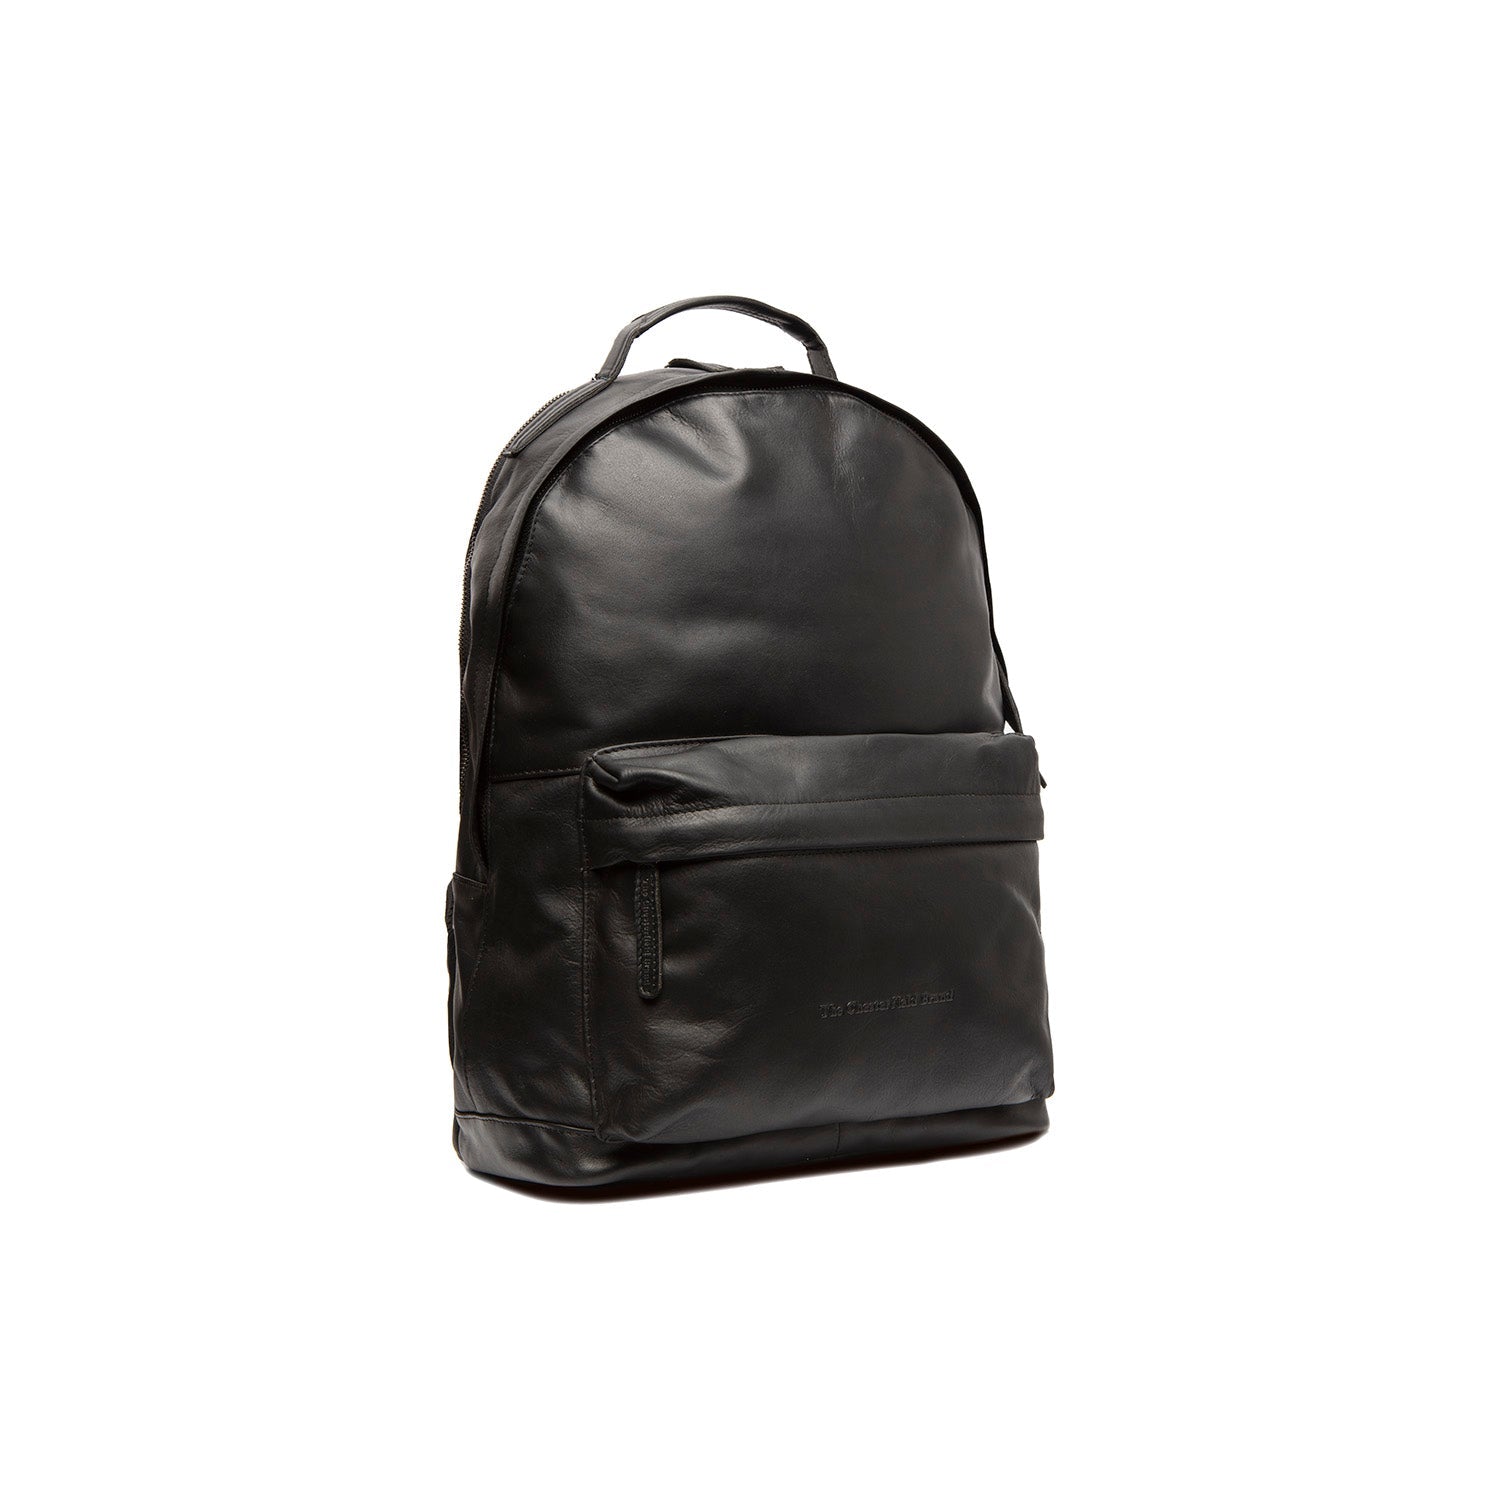 Leder Rucksack Calgary C58.0295 von The Chesterfield Brand - Laure Bags and Travel